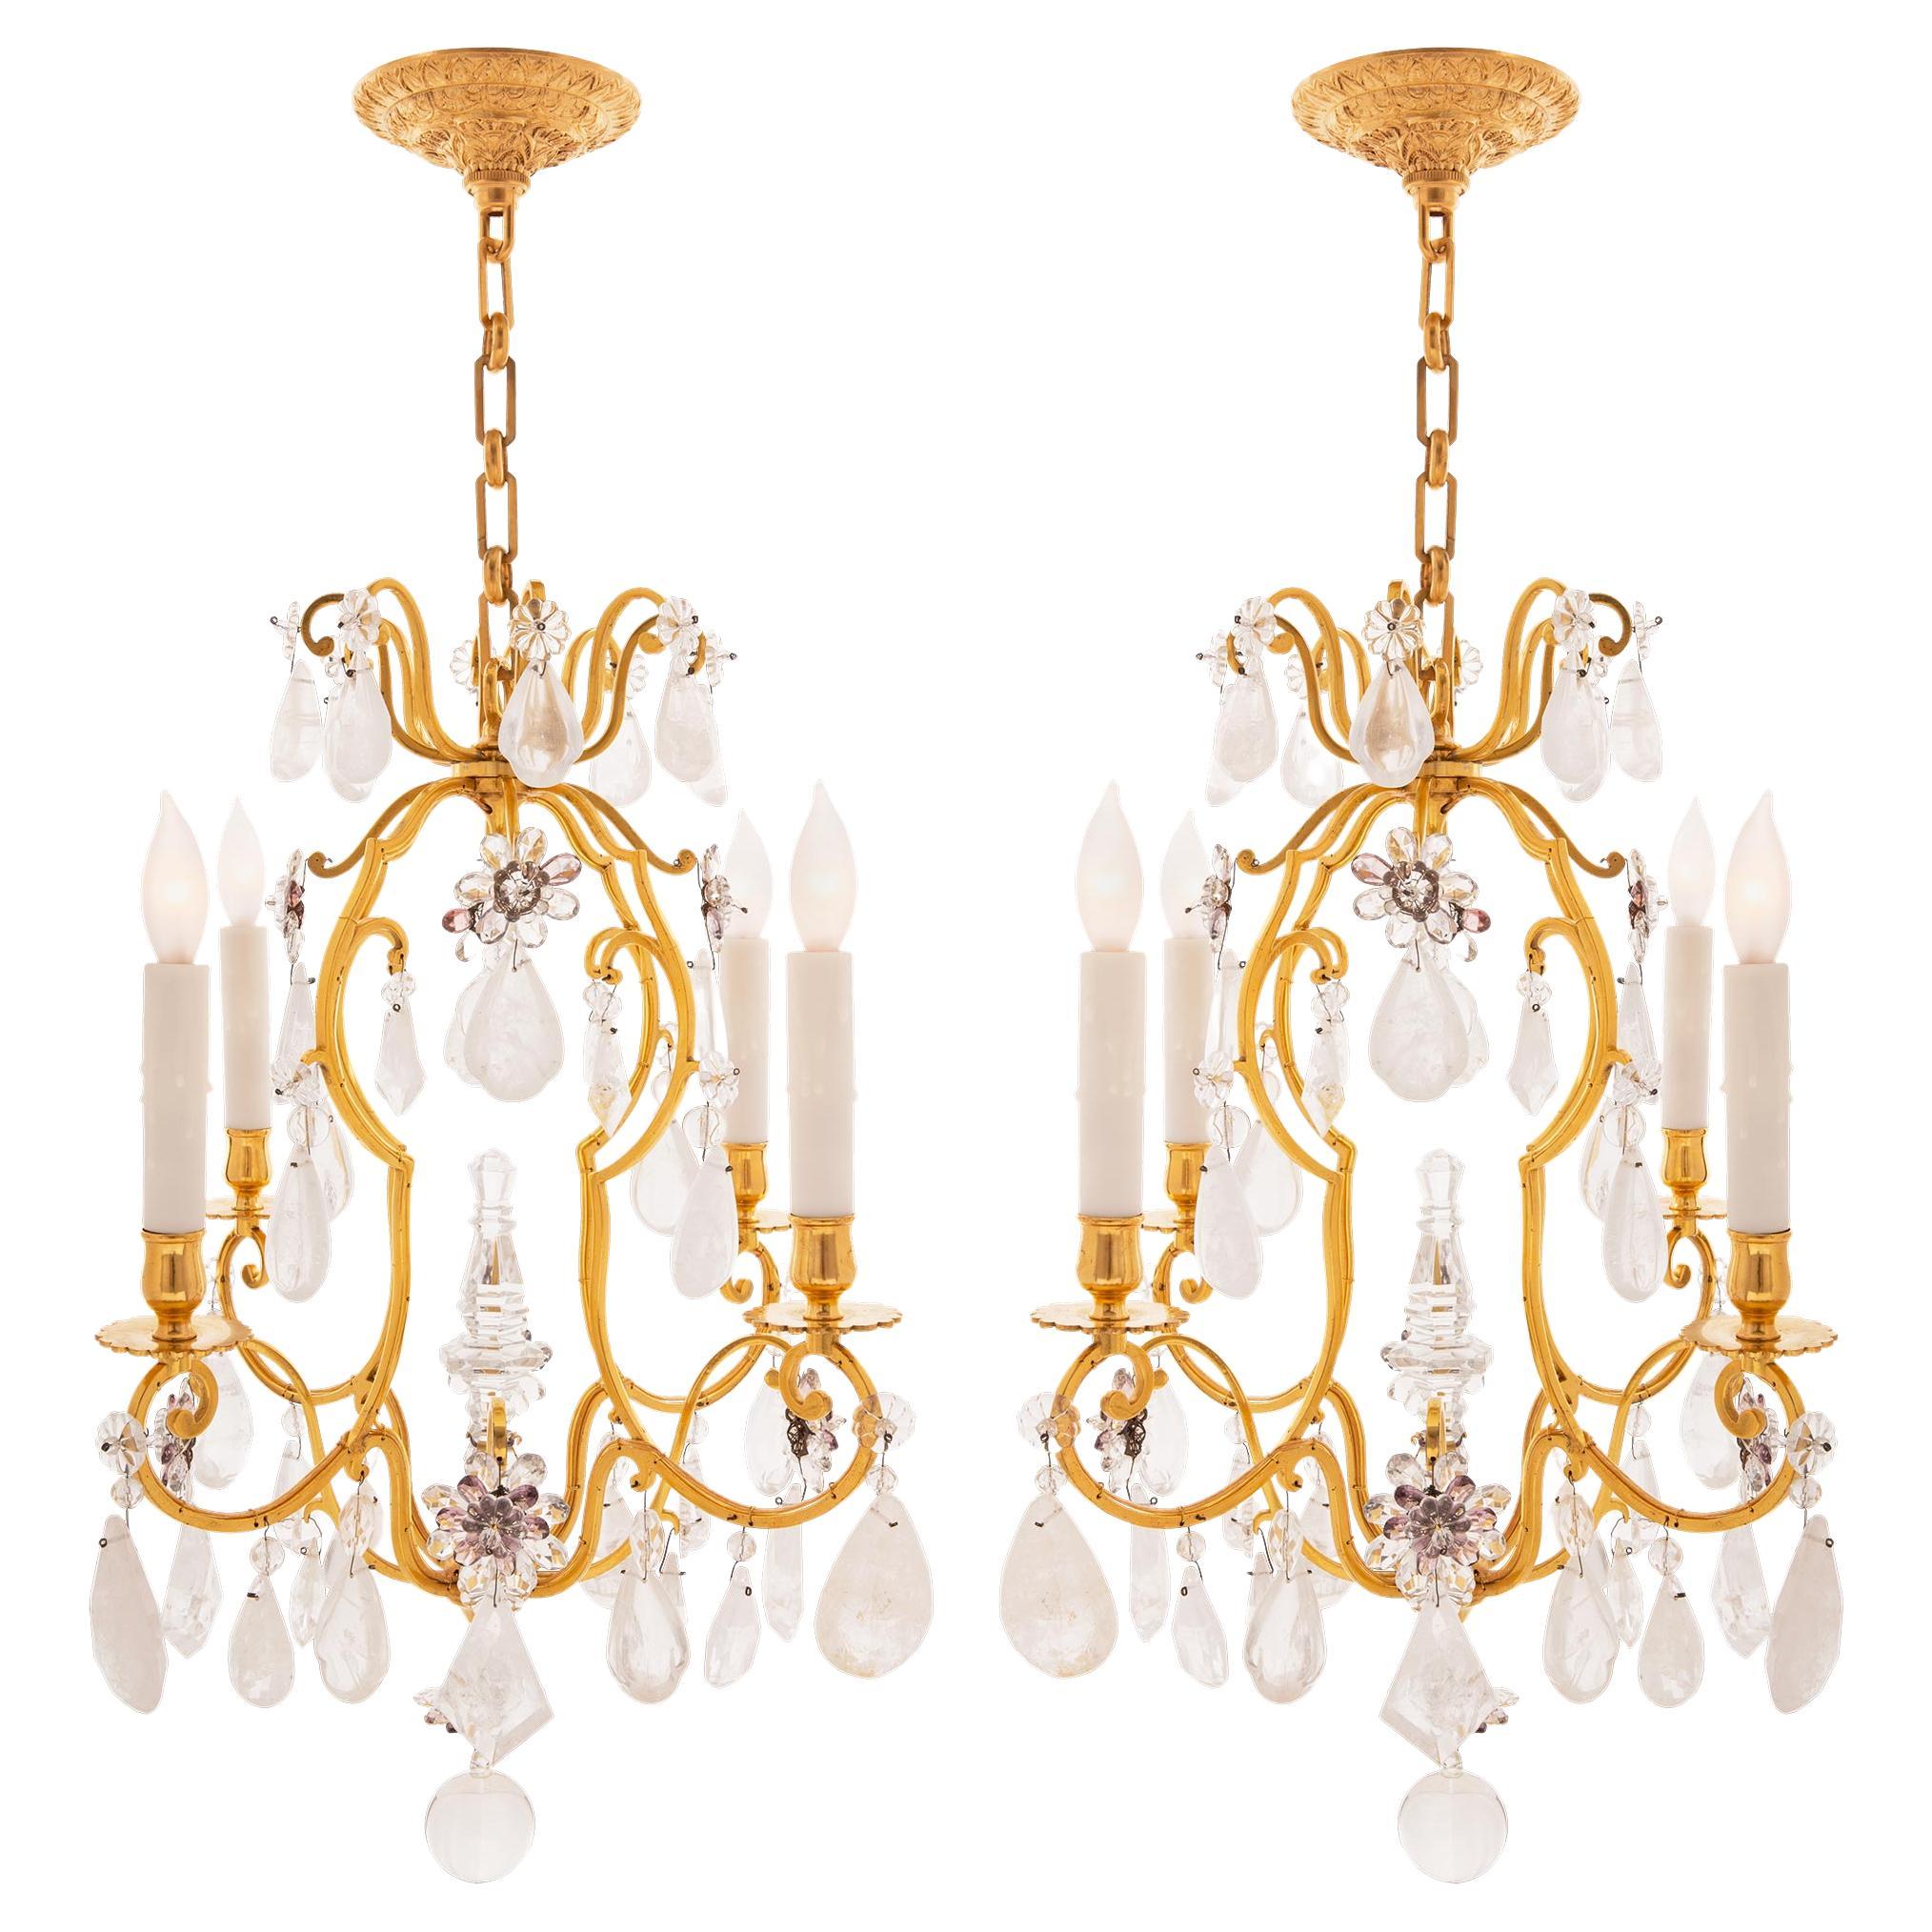 Pair of French Early 19th Century St. Rock Crystal and Glass Chandeliers